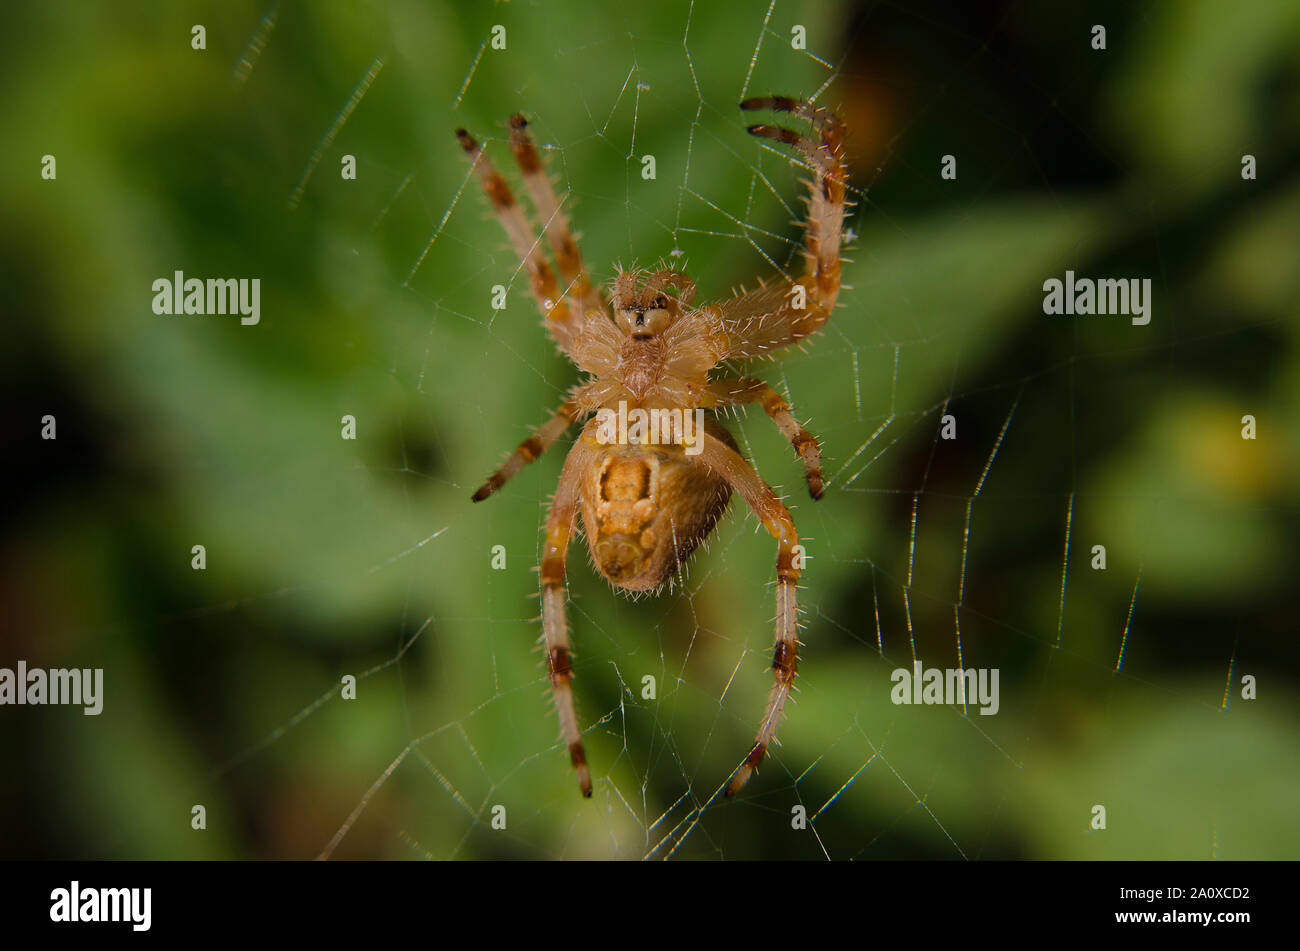 Closeup of a cross spider (crowned orb weaver, Araneus diadematus) on its web. Blurred green background Stock Photo